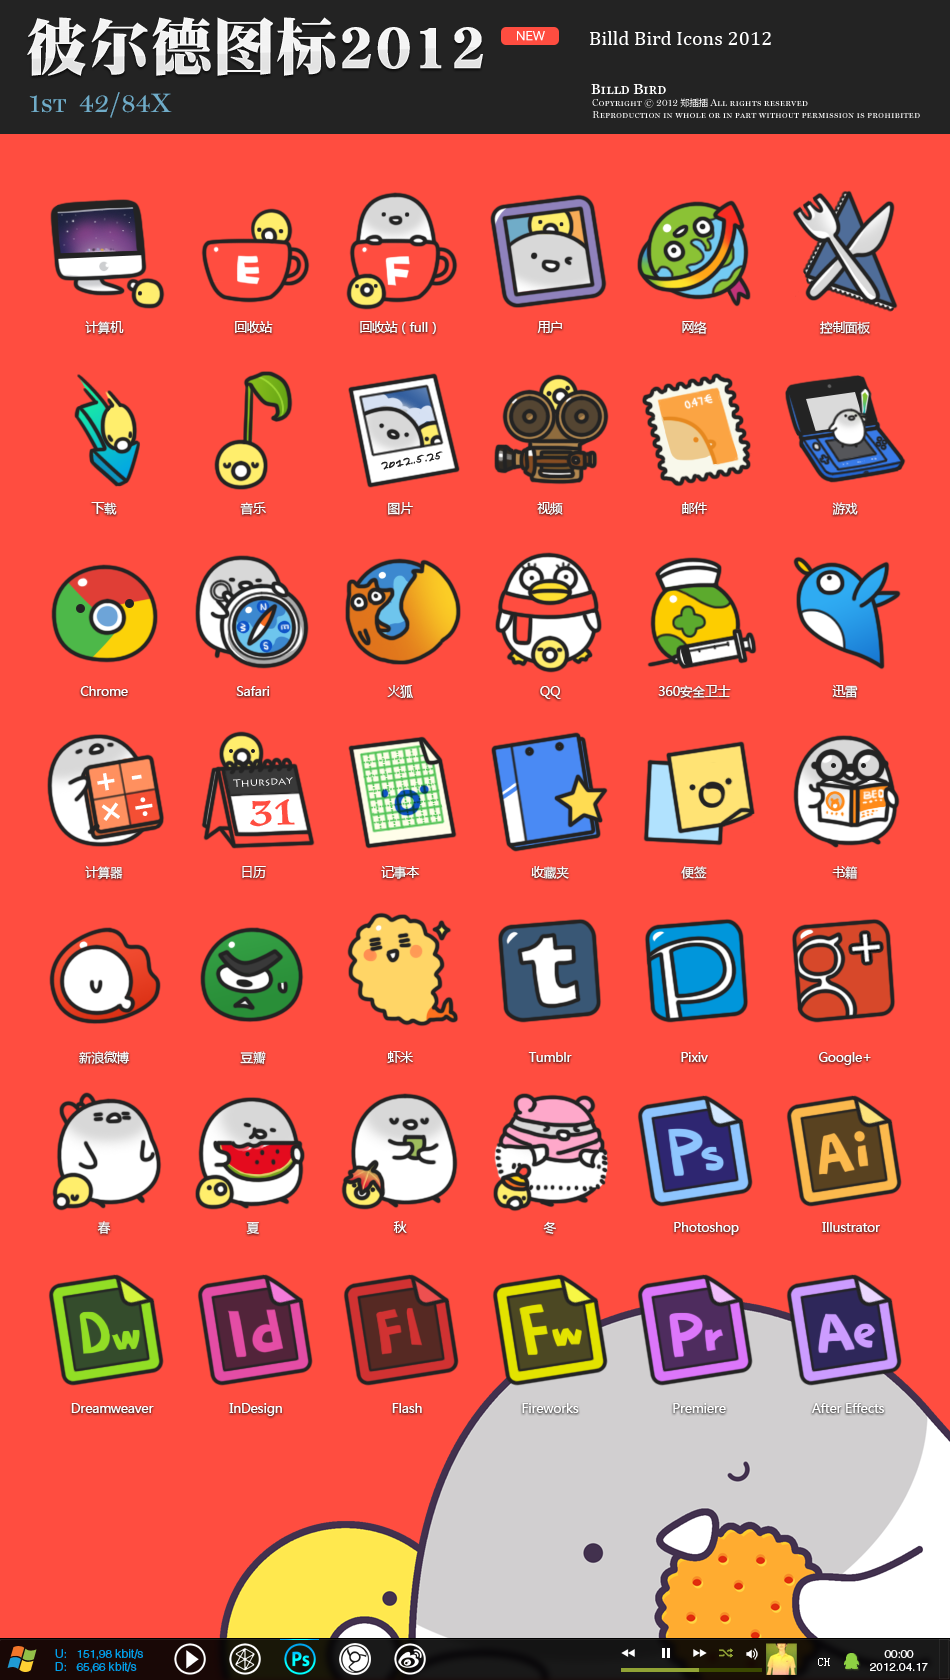 Billd Bird Icons new1st.png